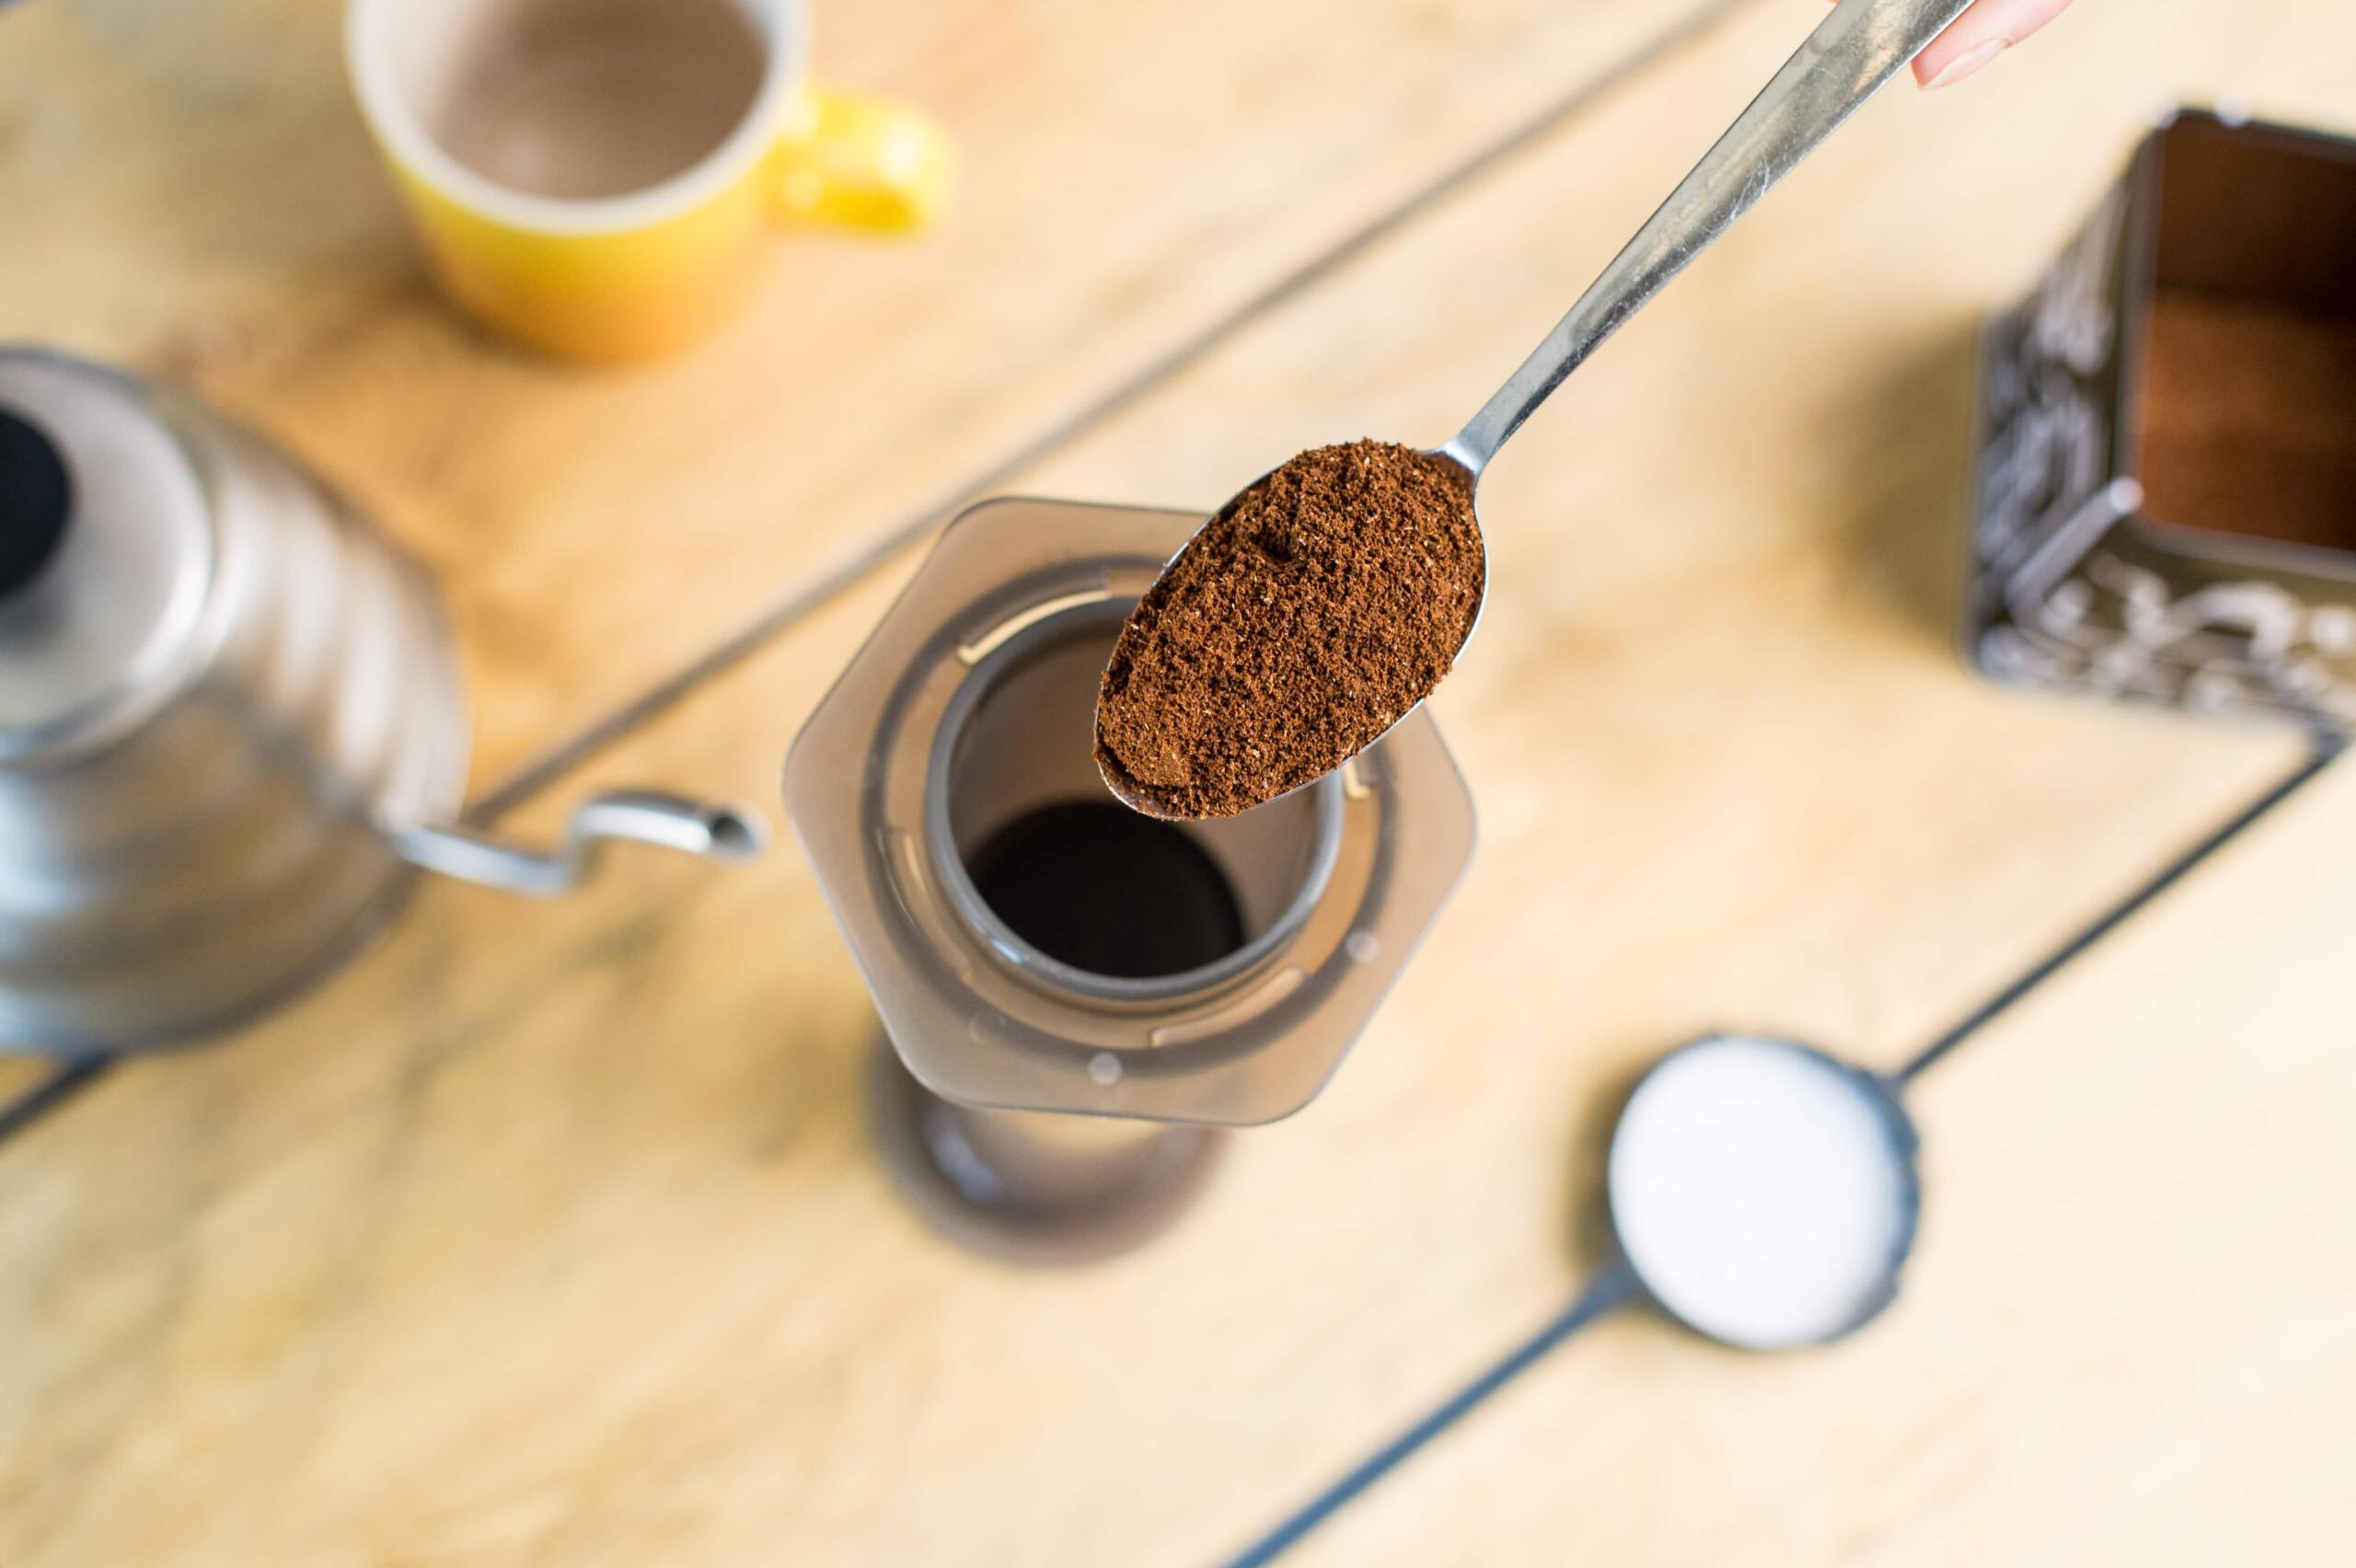 tipping ground coffee into AeroPress using a spoon